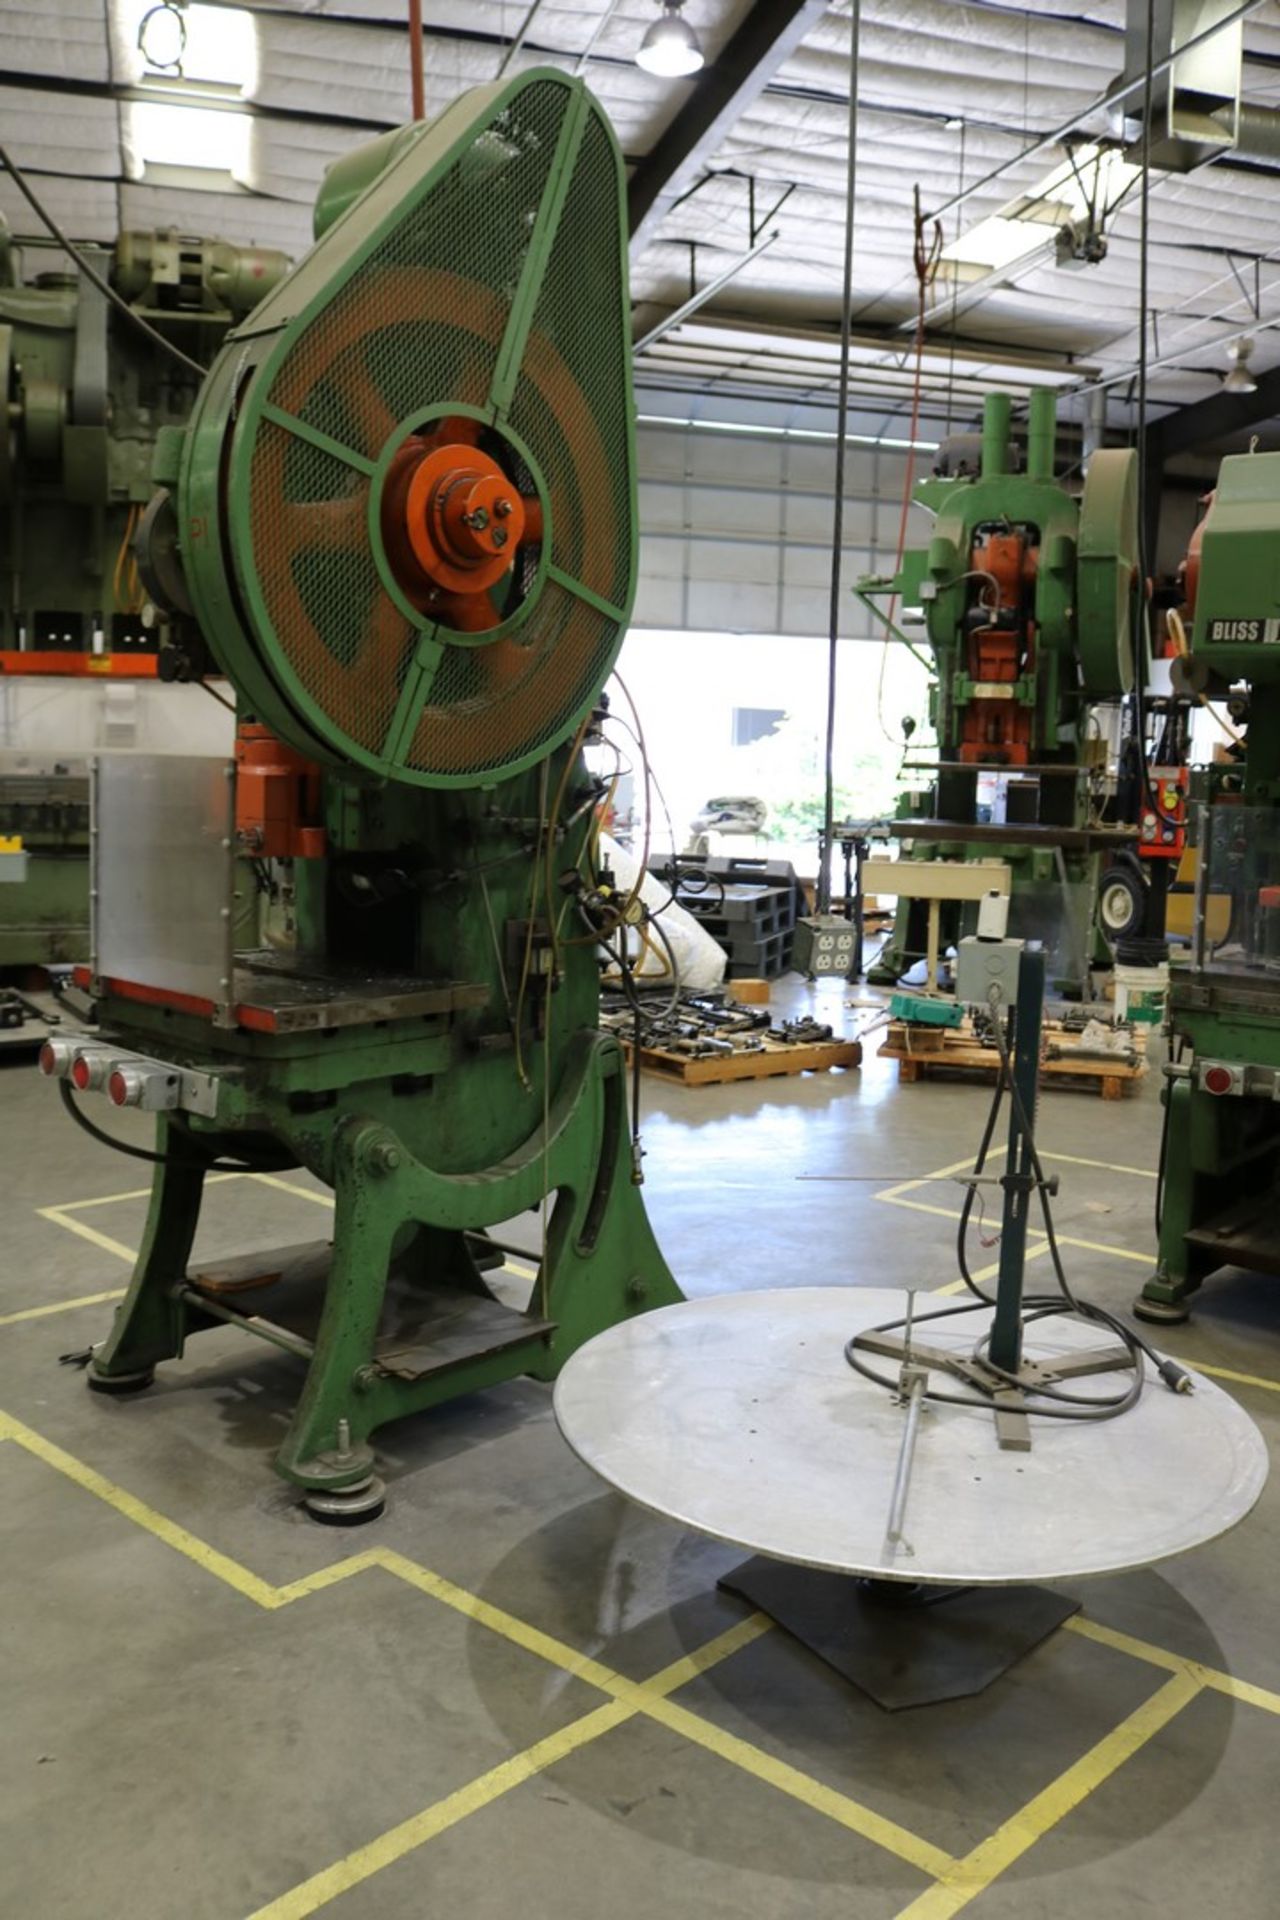 Bliss 35 Ton Mechanical Punch Press, Includes Auto Stock Reel with Dancer Arm - Image 2 of 12